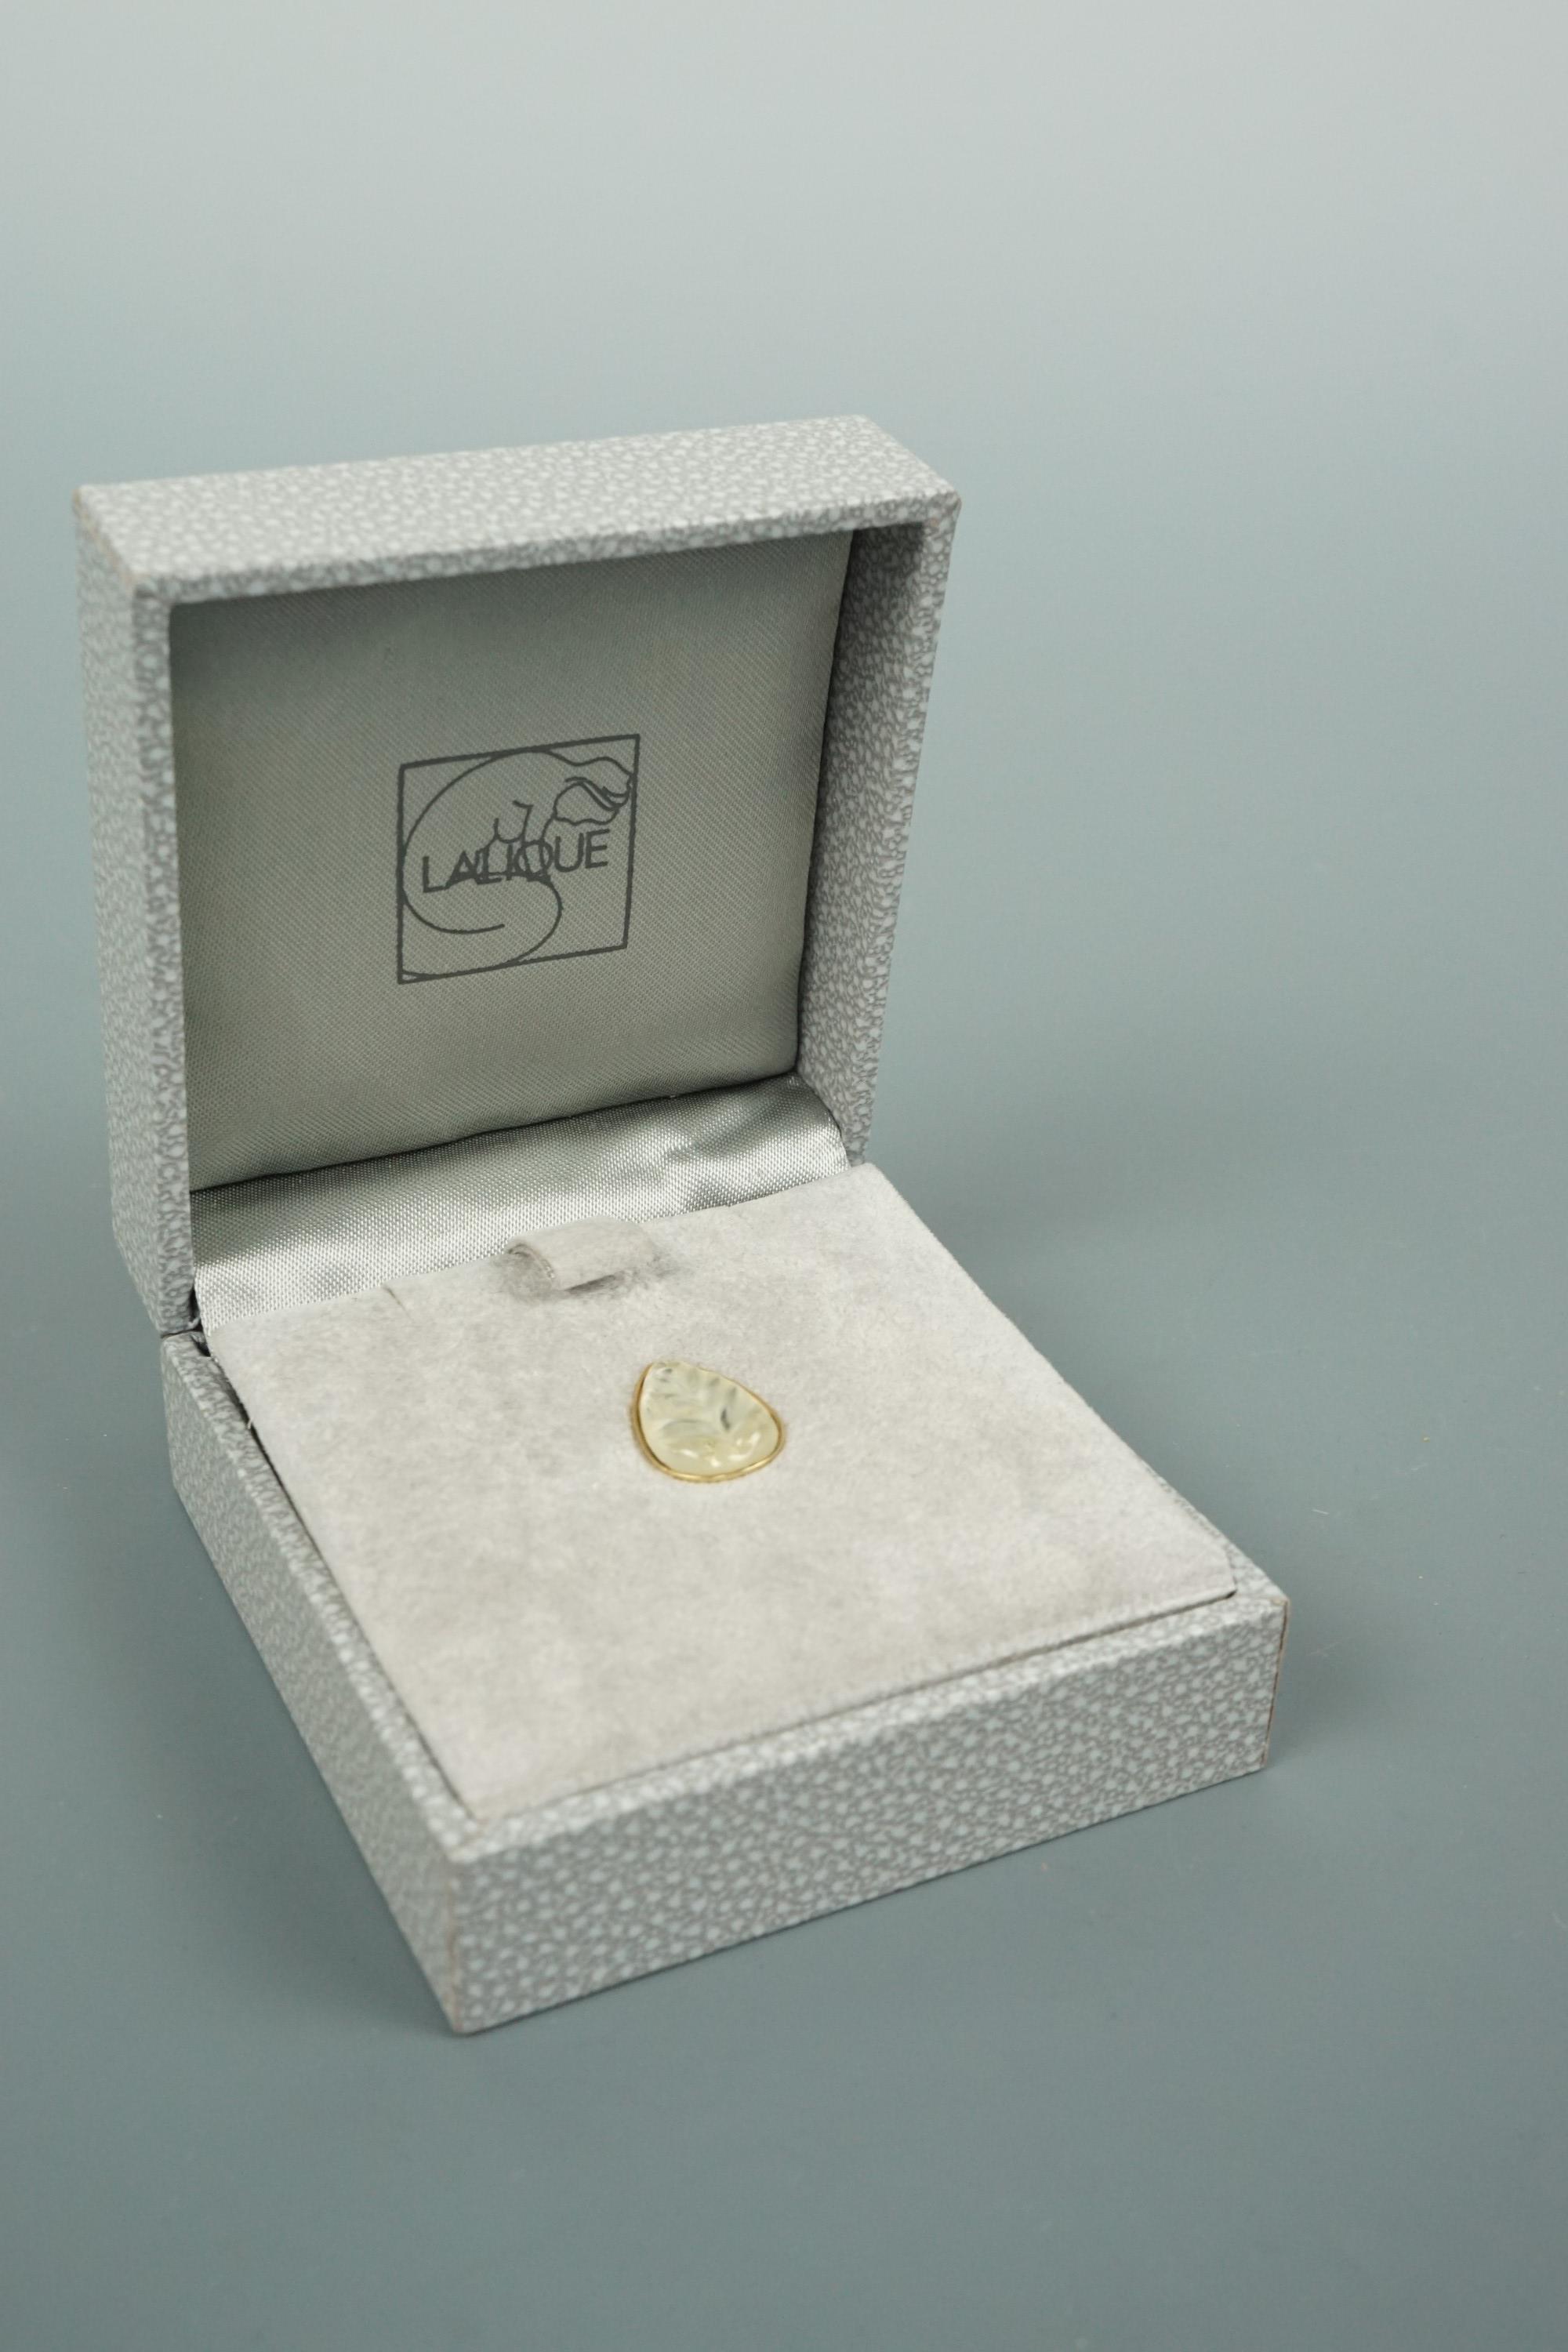 A Lalique crystal stud in the form of a leaf, gold plated, in original presentation box